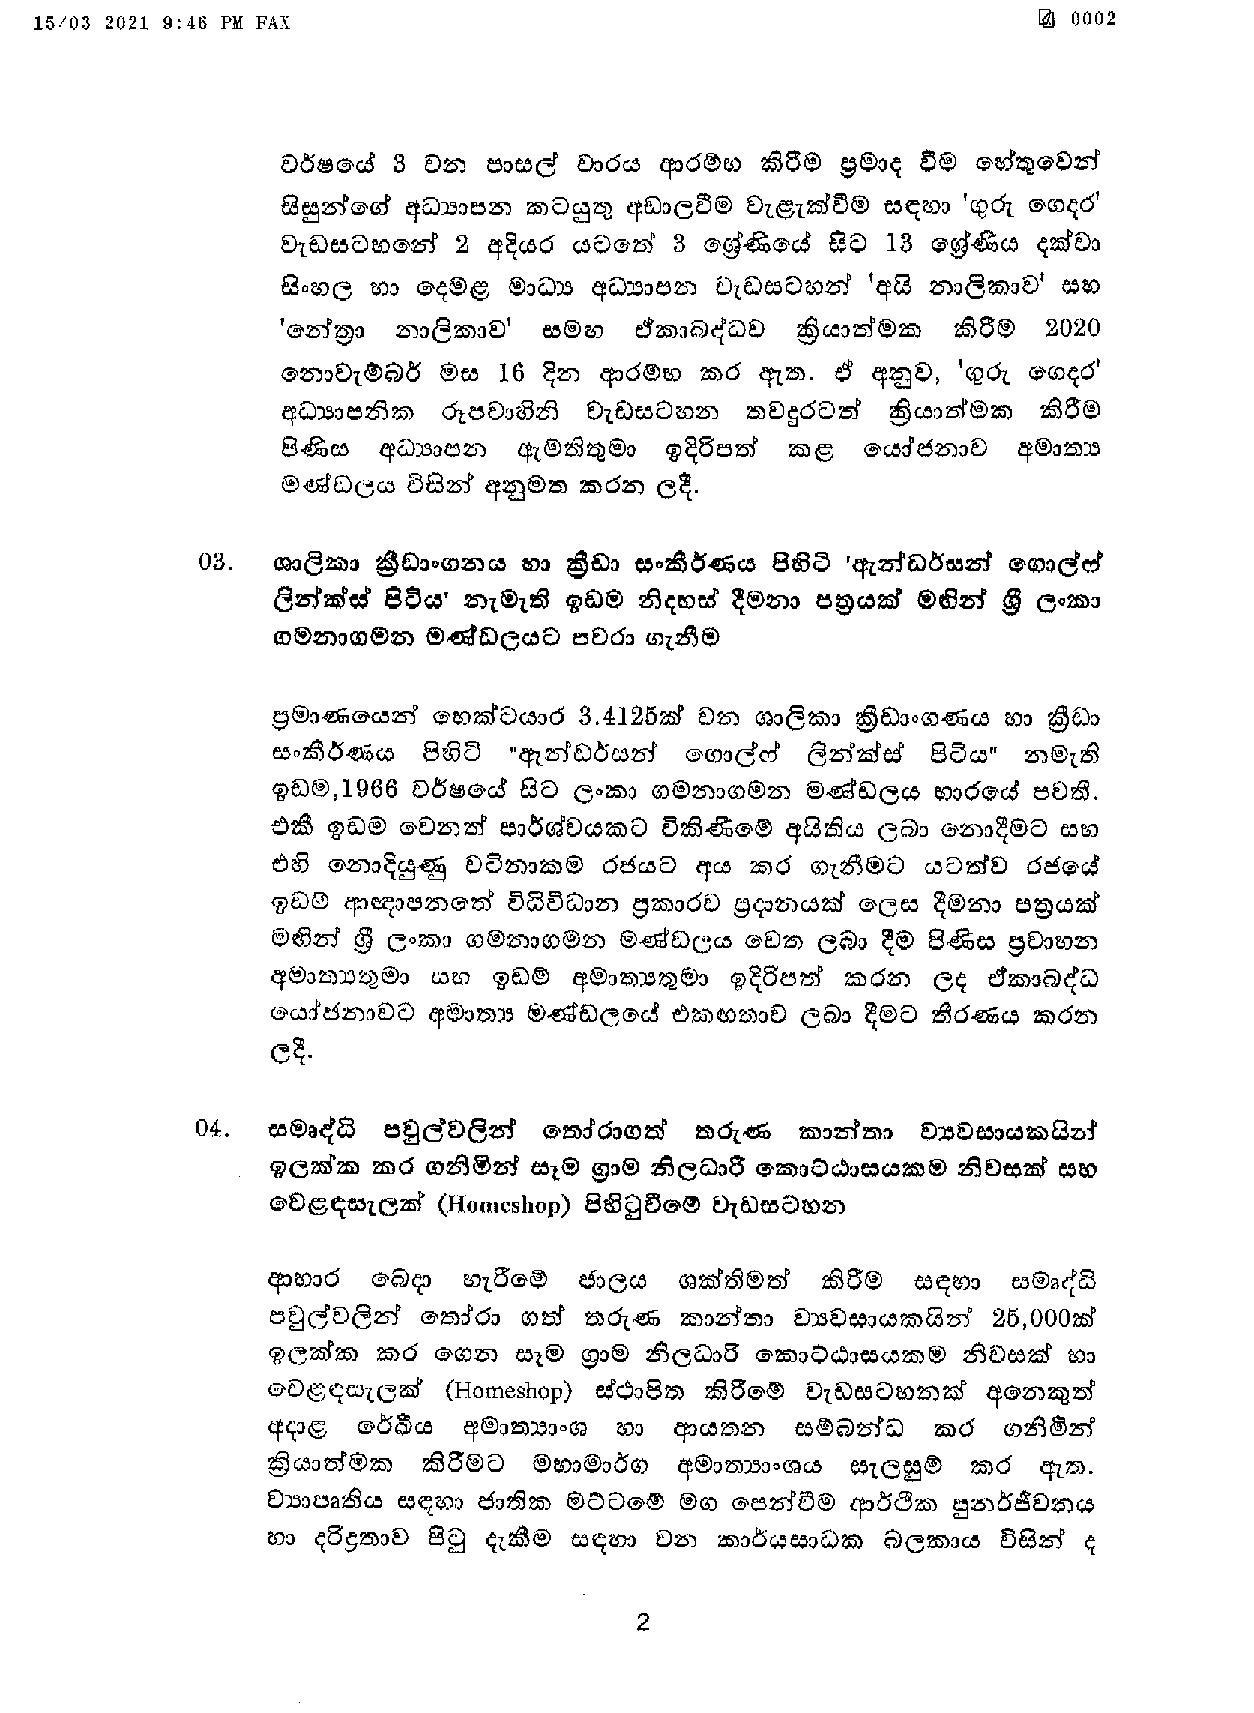 Cabinet Decision on 15.03.2021 page 002